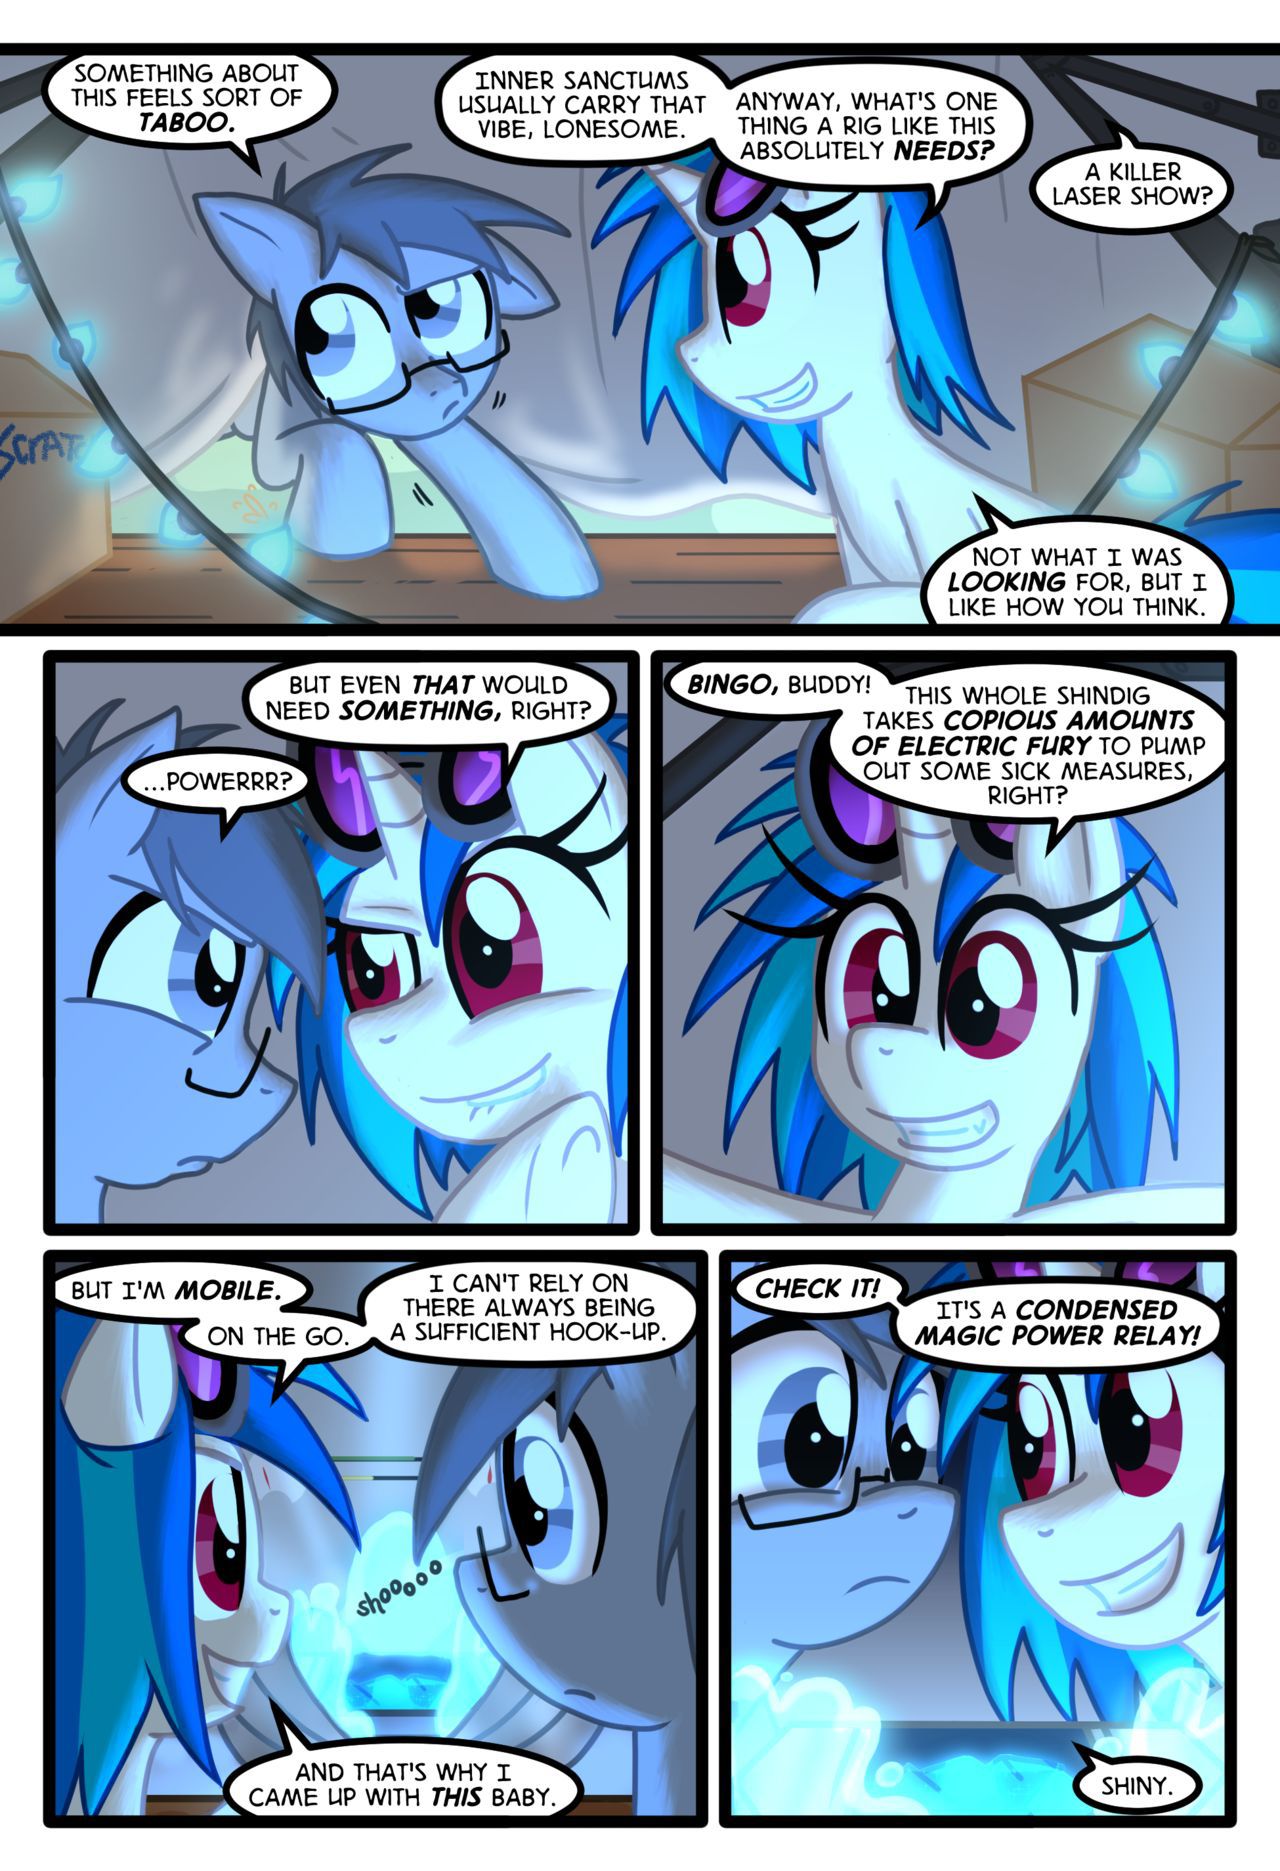 [Zaron] Lonely Hooves (My Little Pony Friendship Is Magic) [Ongoing] 55